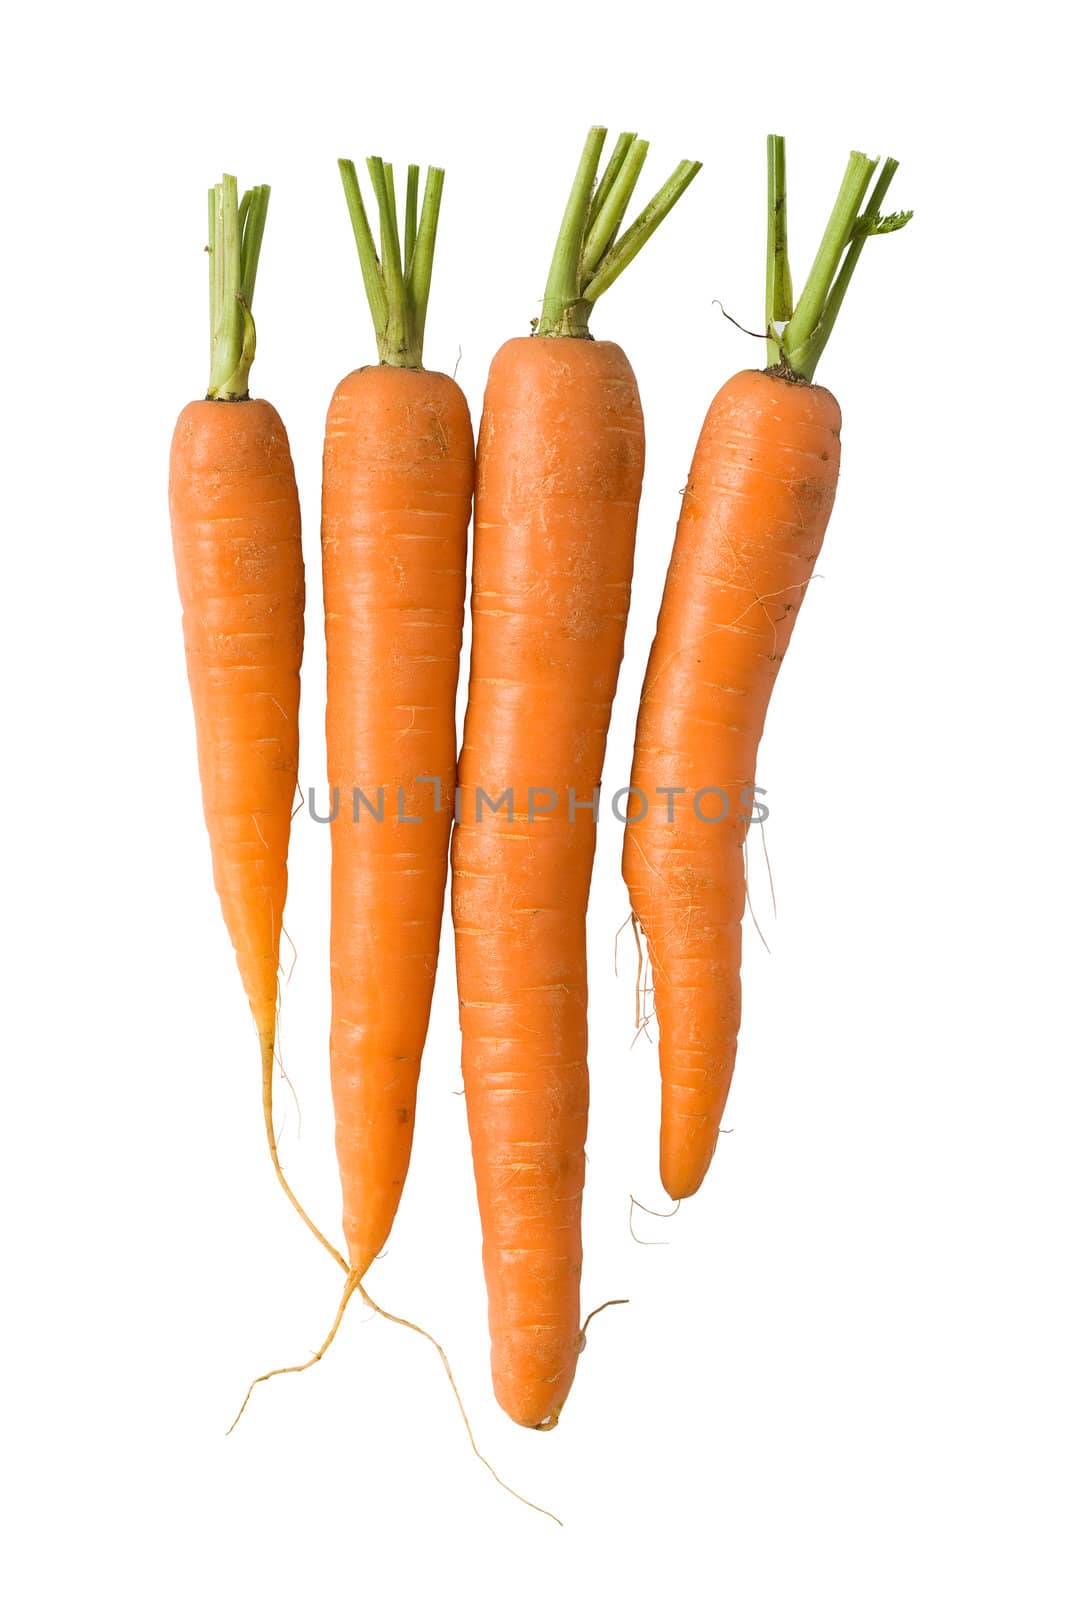 Bunch of fresh carrots isolated on white background. Clipping path included to replace background.